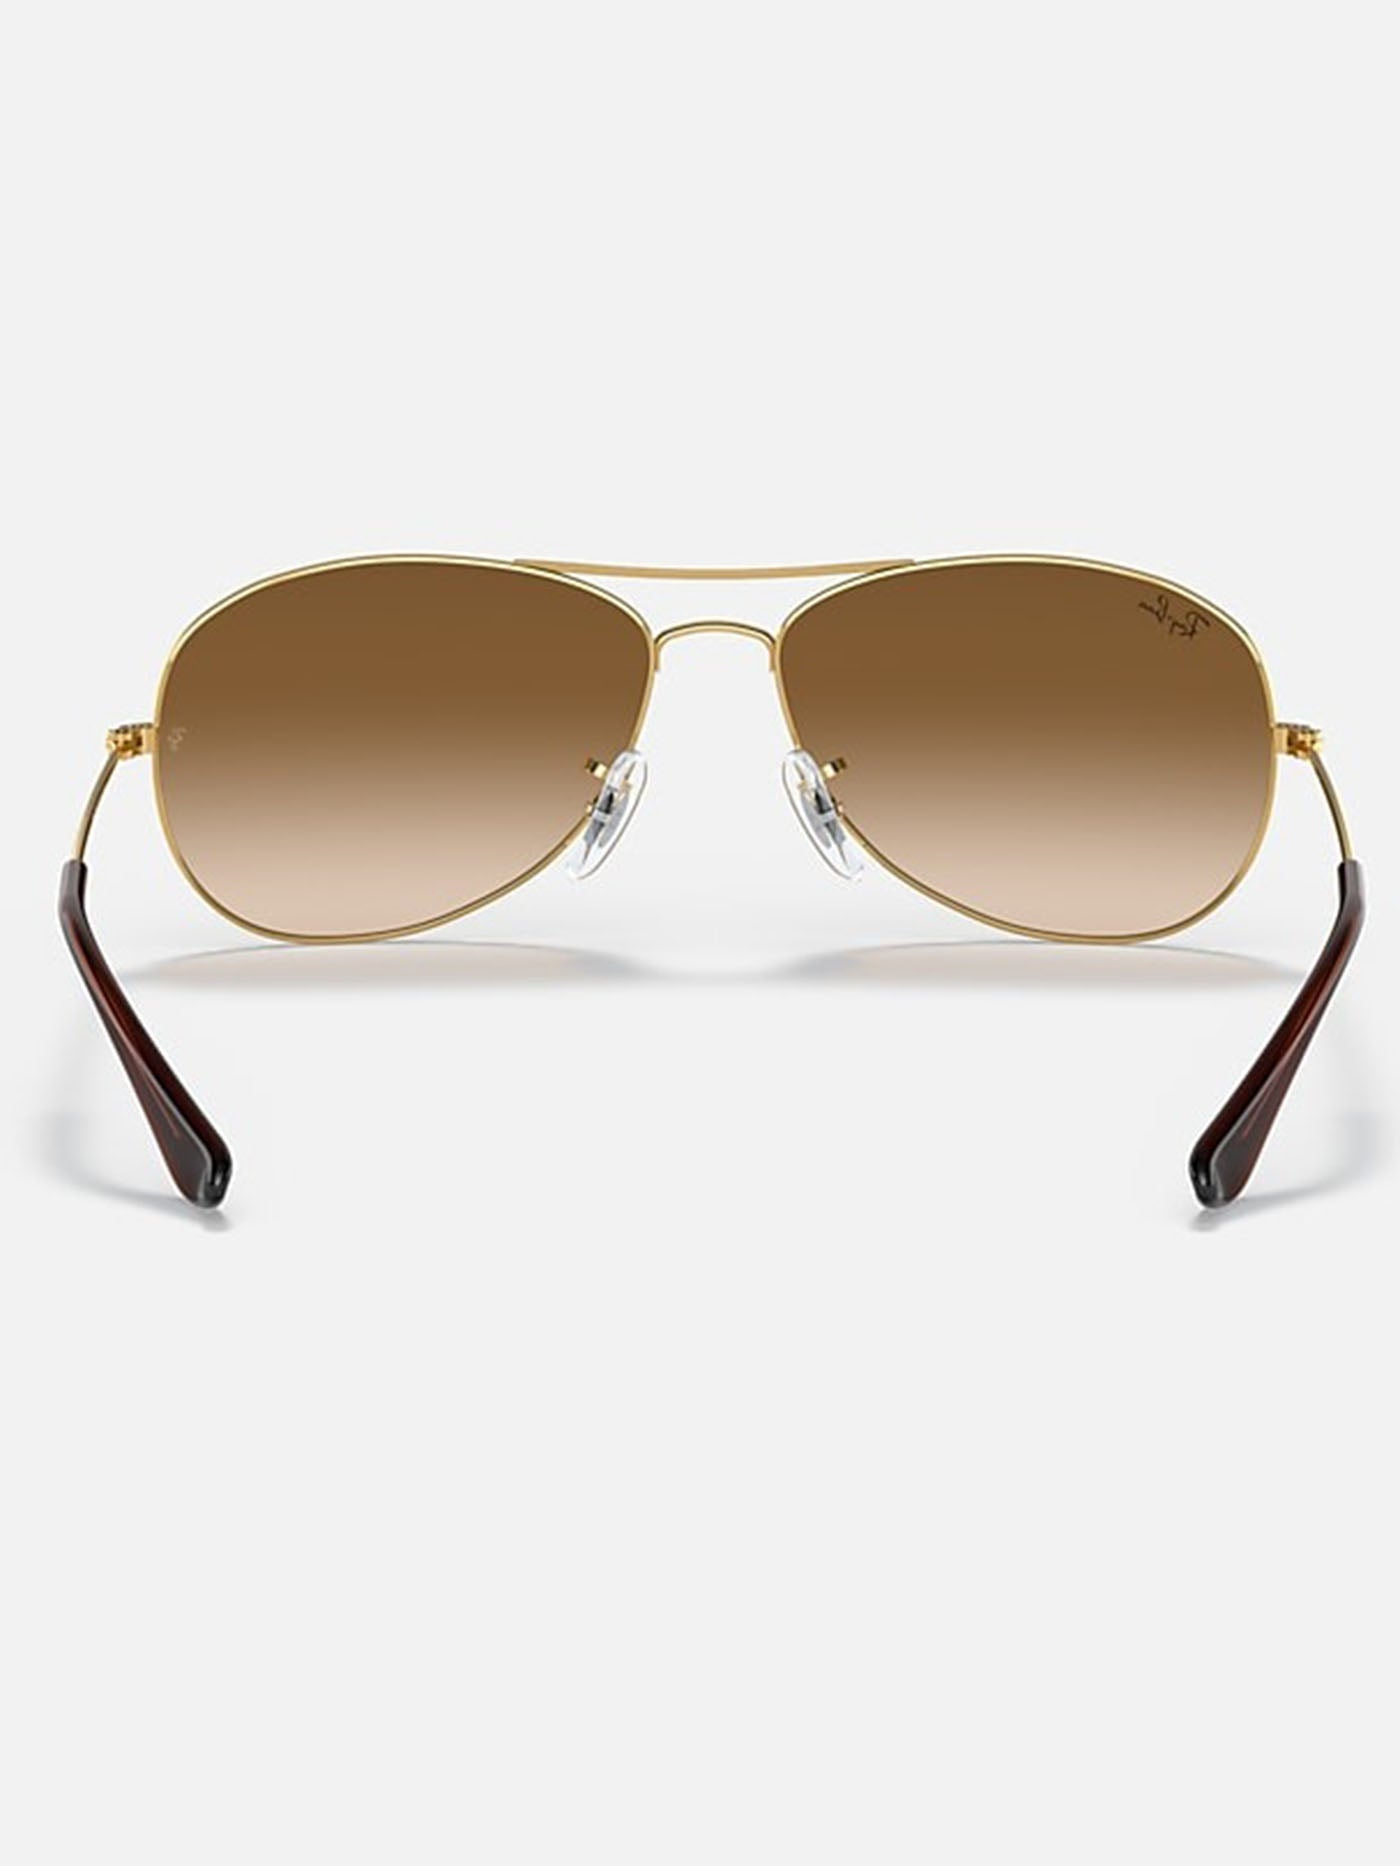 Ray Ban 2024 Cockpit Gold/Brown Gradient Sunglasses